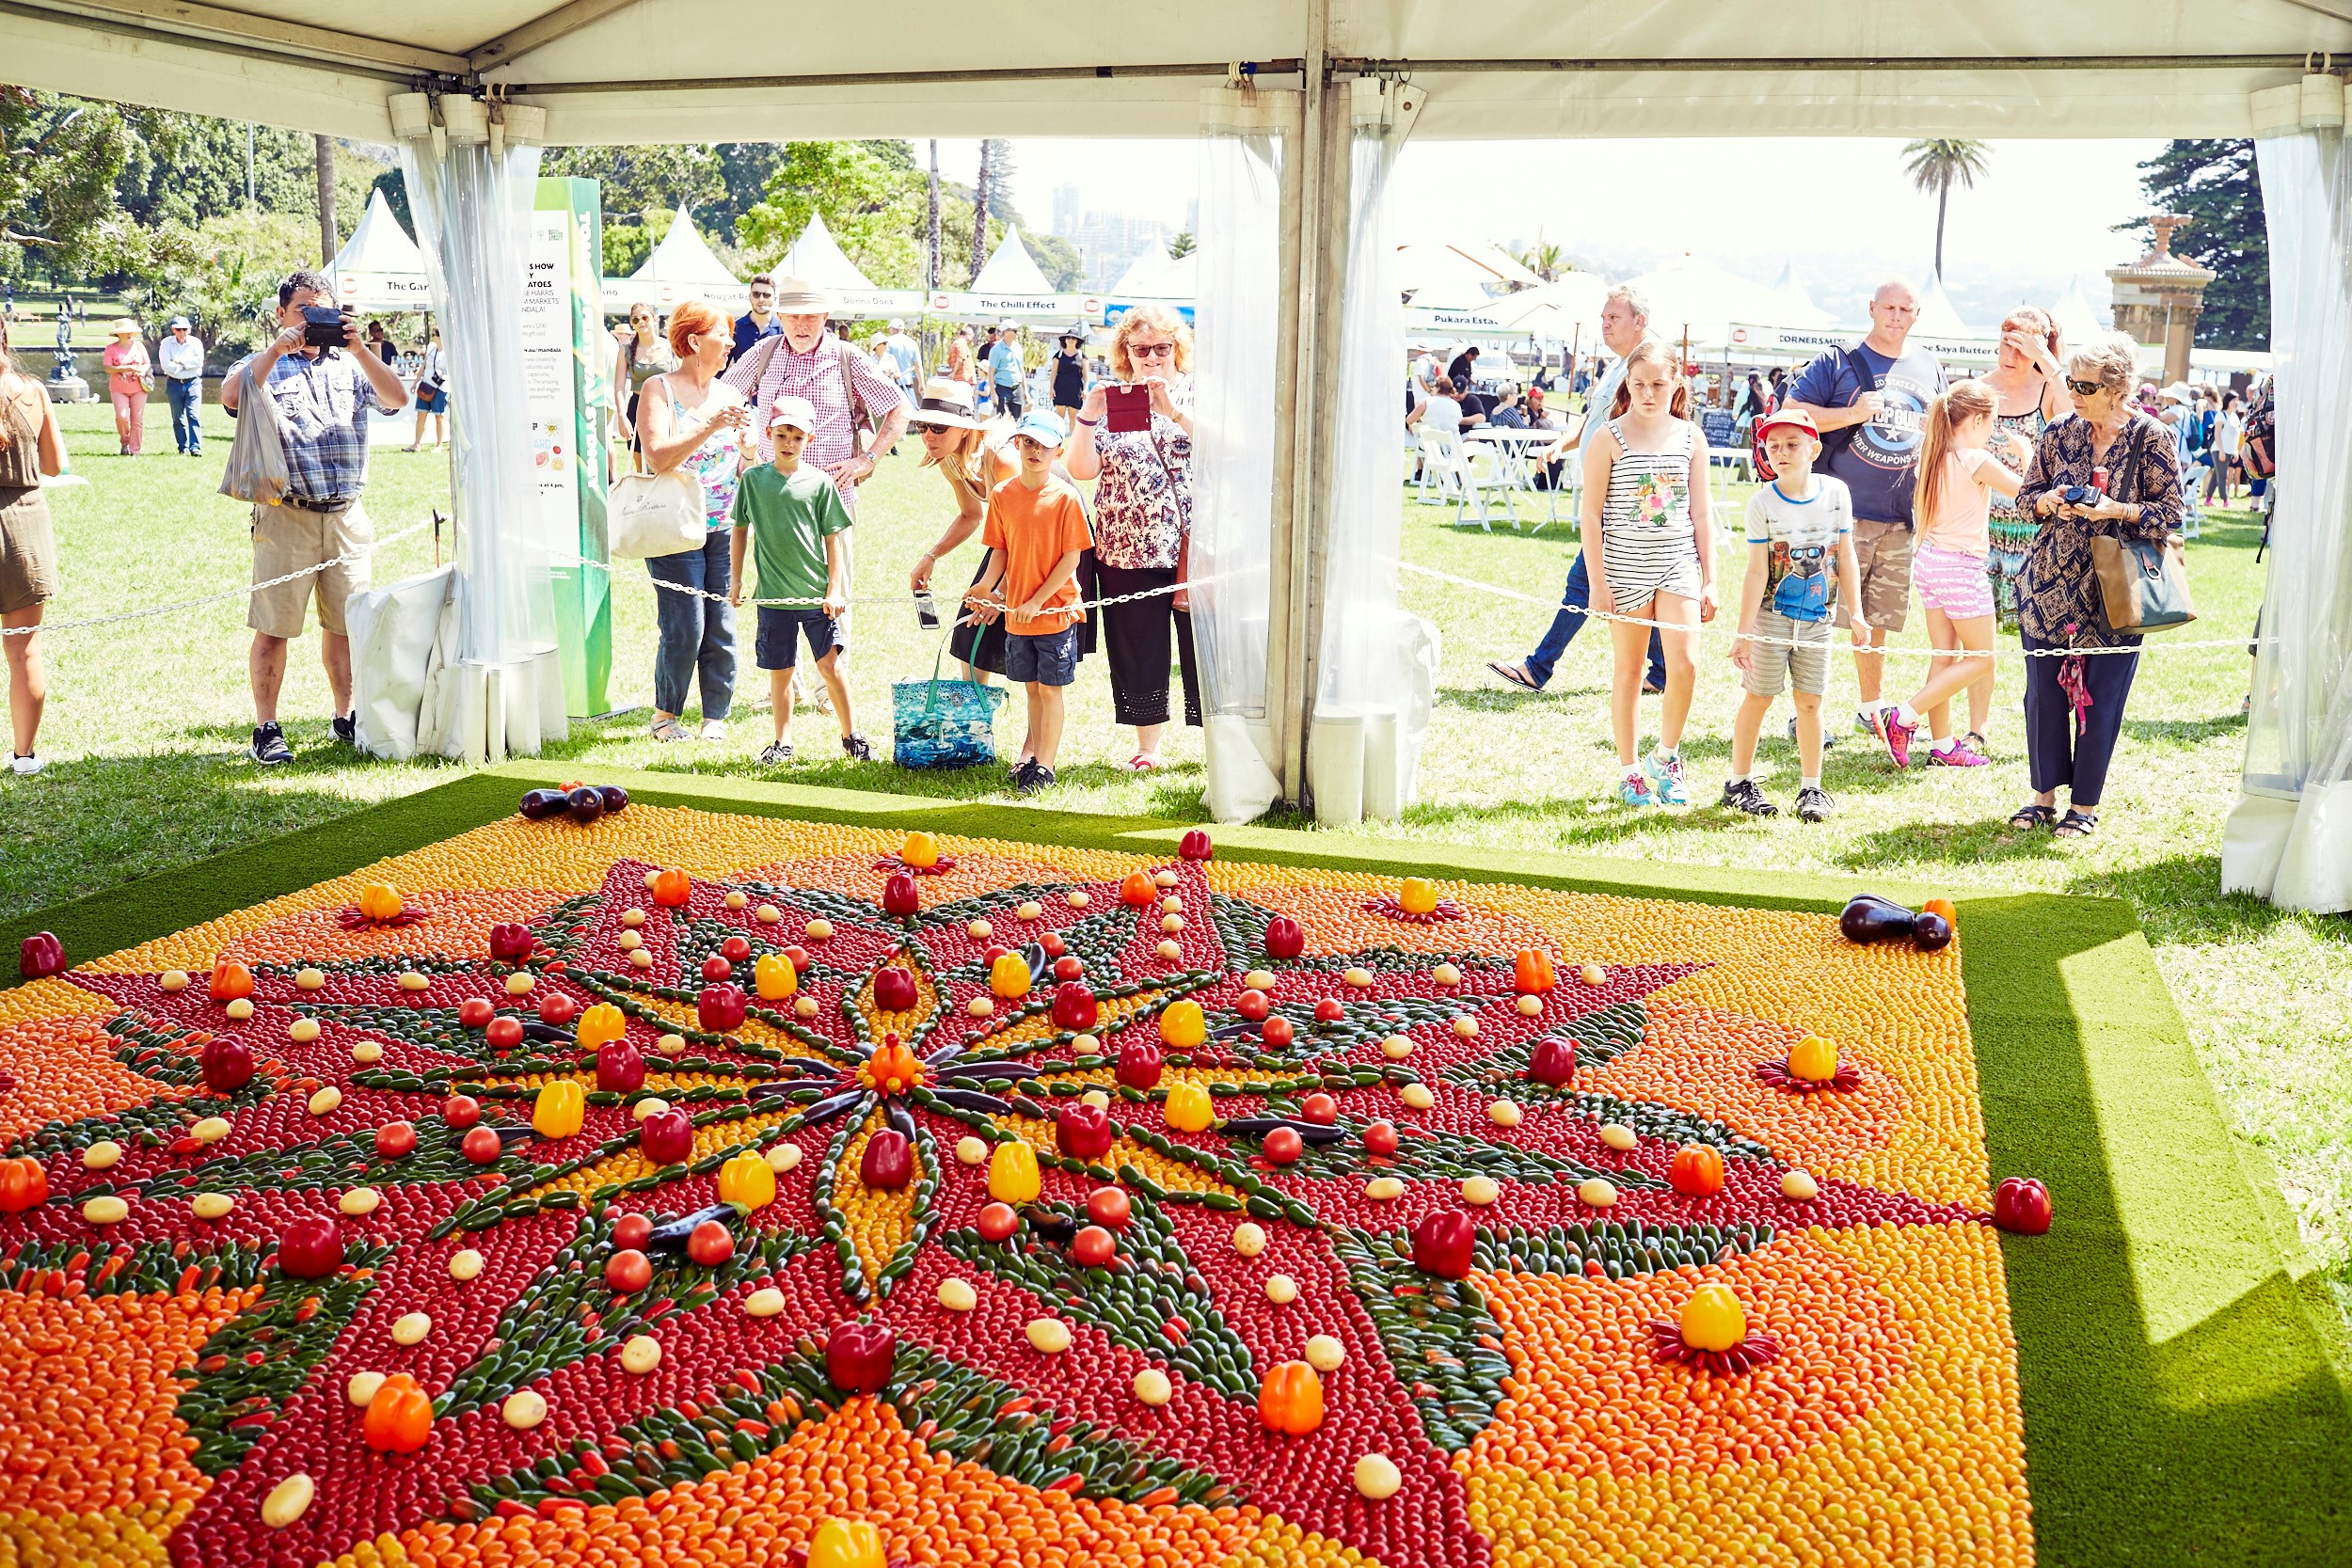 It's On Again. The Annual Tomato Festival! Sydney Scoop